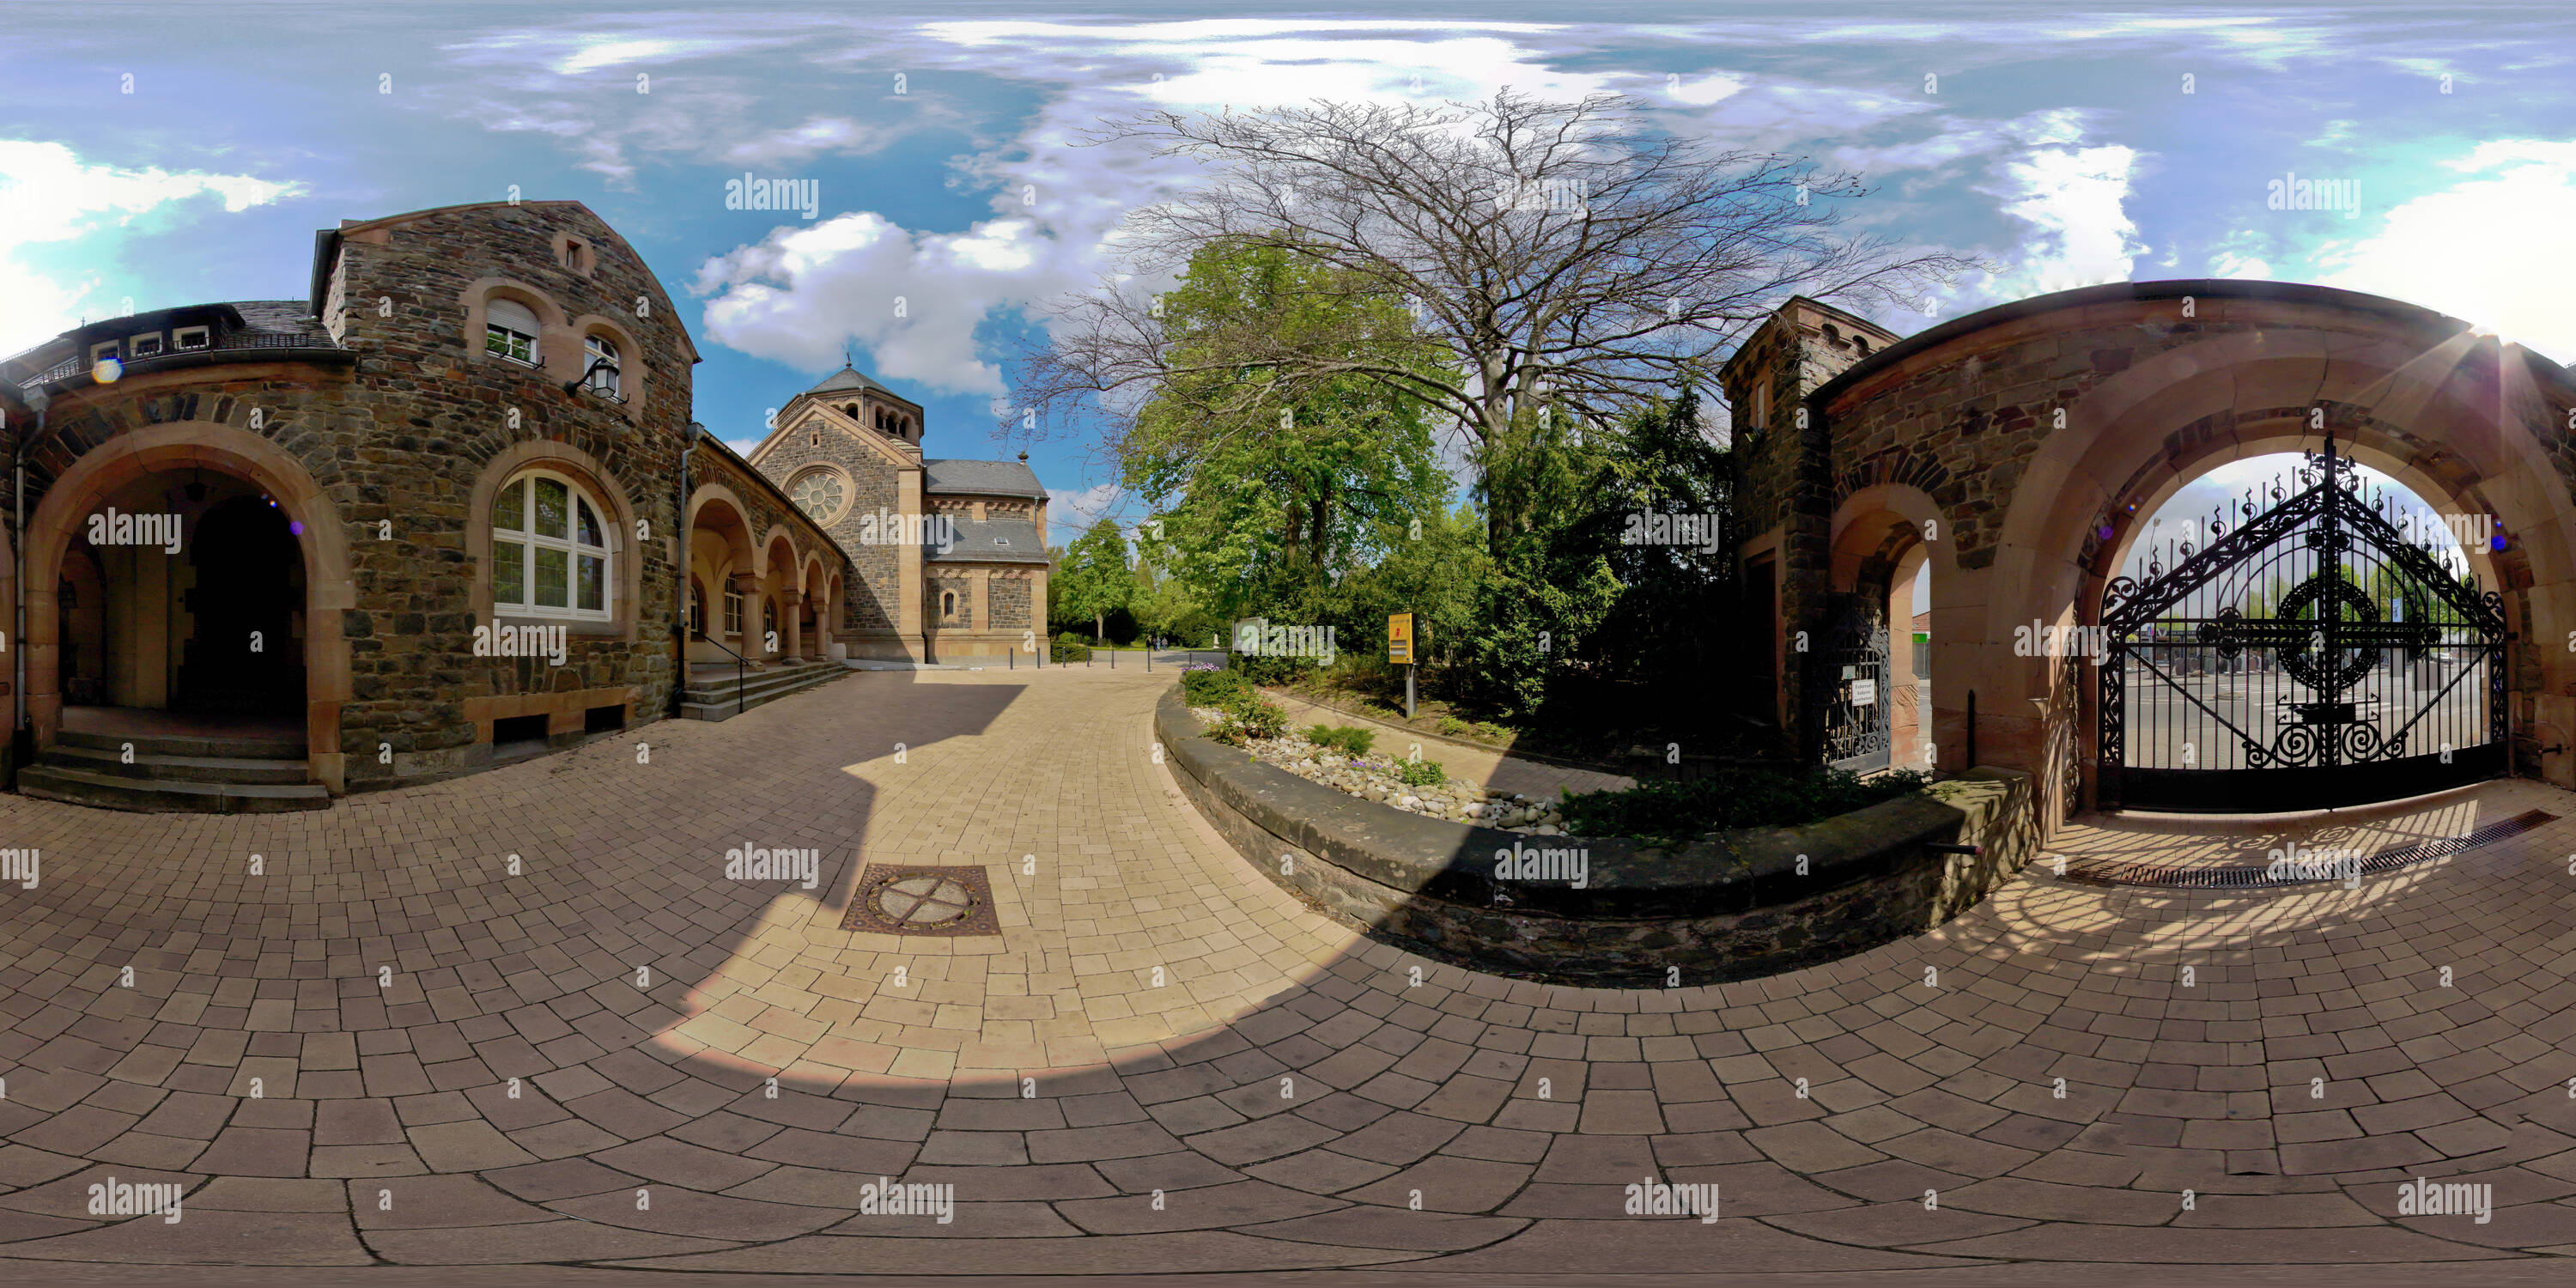 360 degree panoramic view of Main Cemetery Worms, Hochheimer Höhe, Entrance Area, 2017-04 freehand